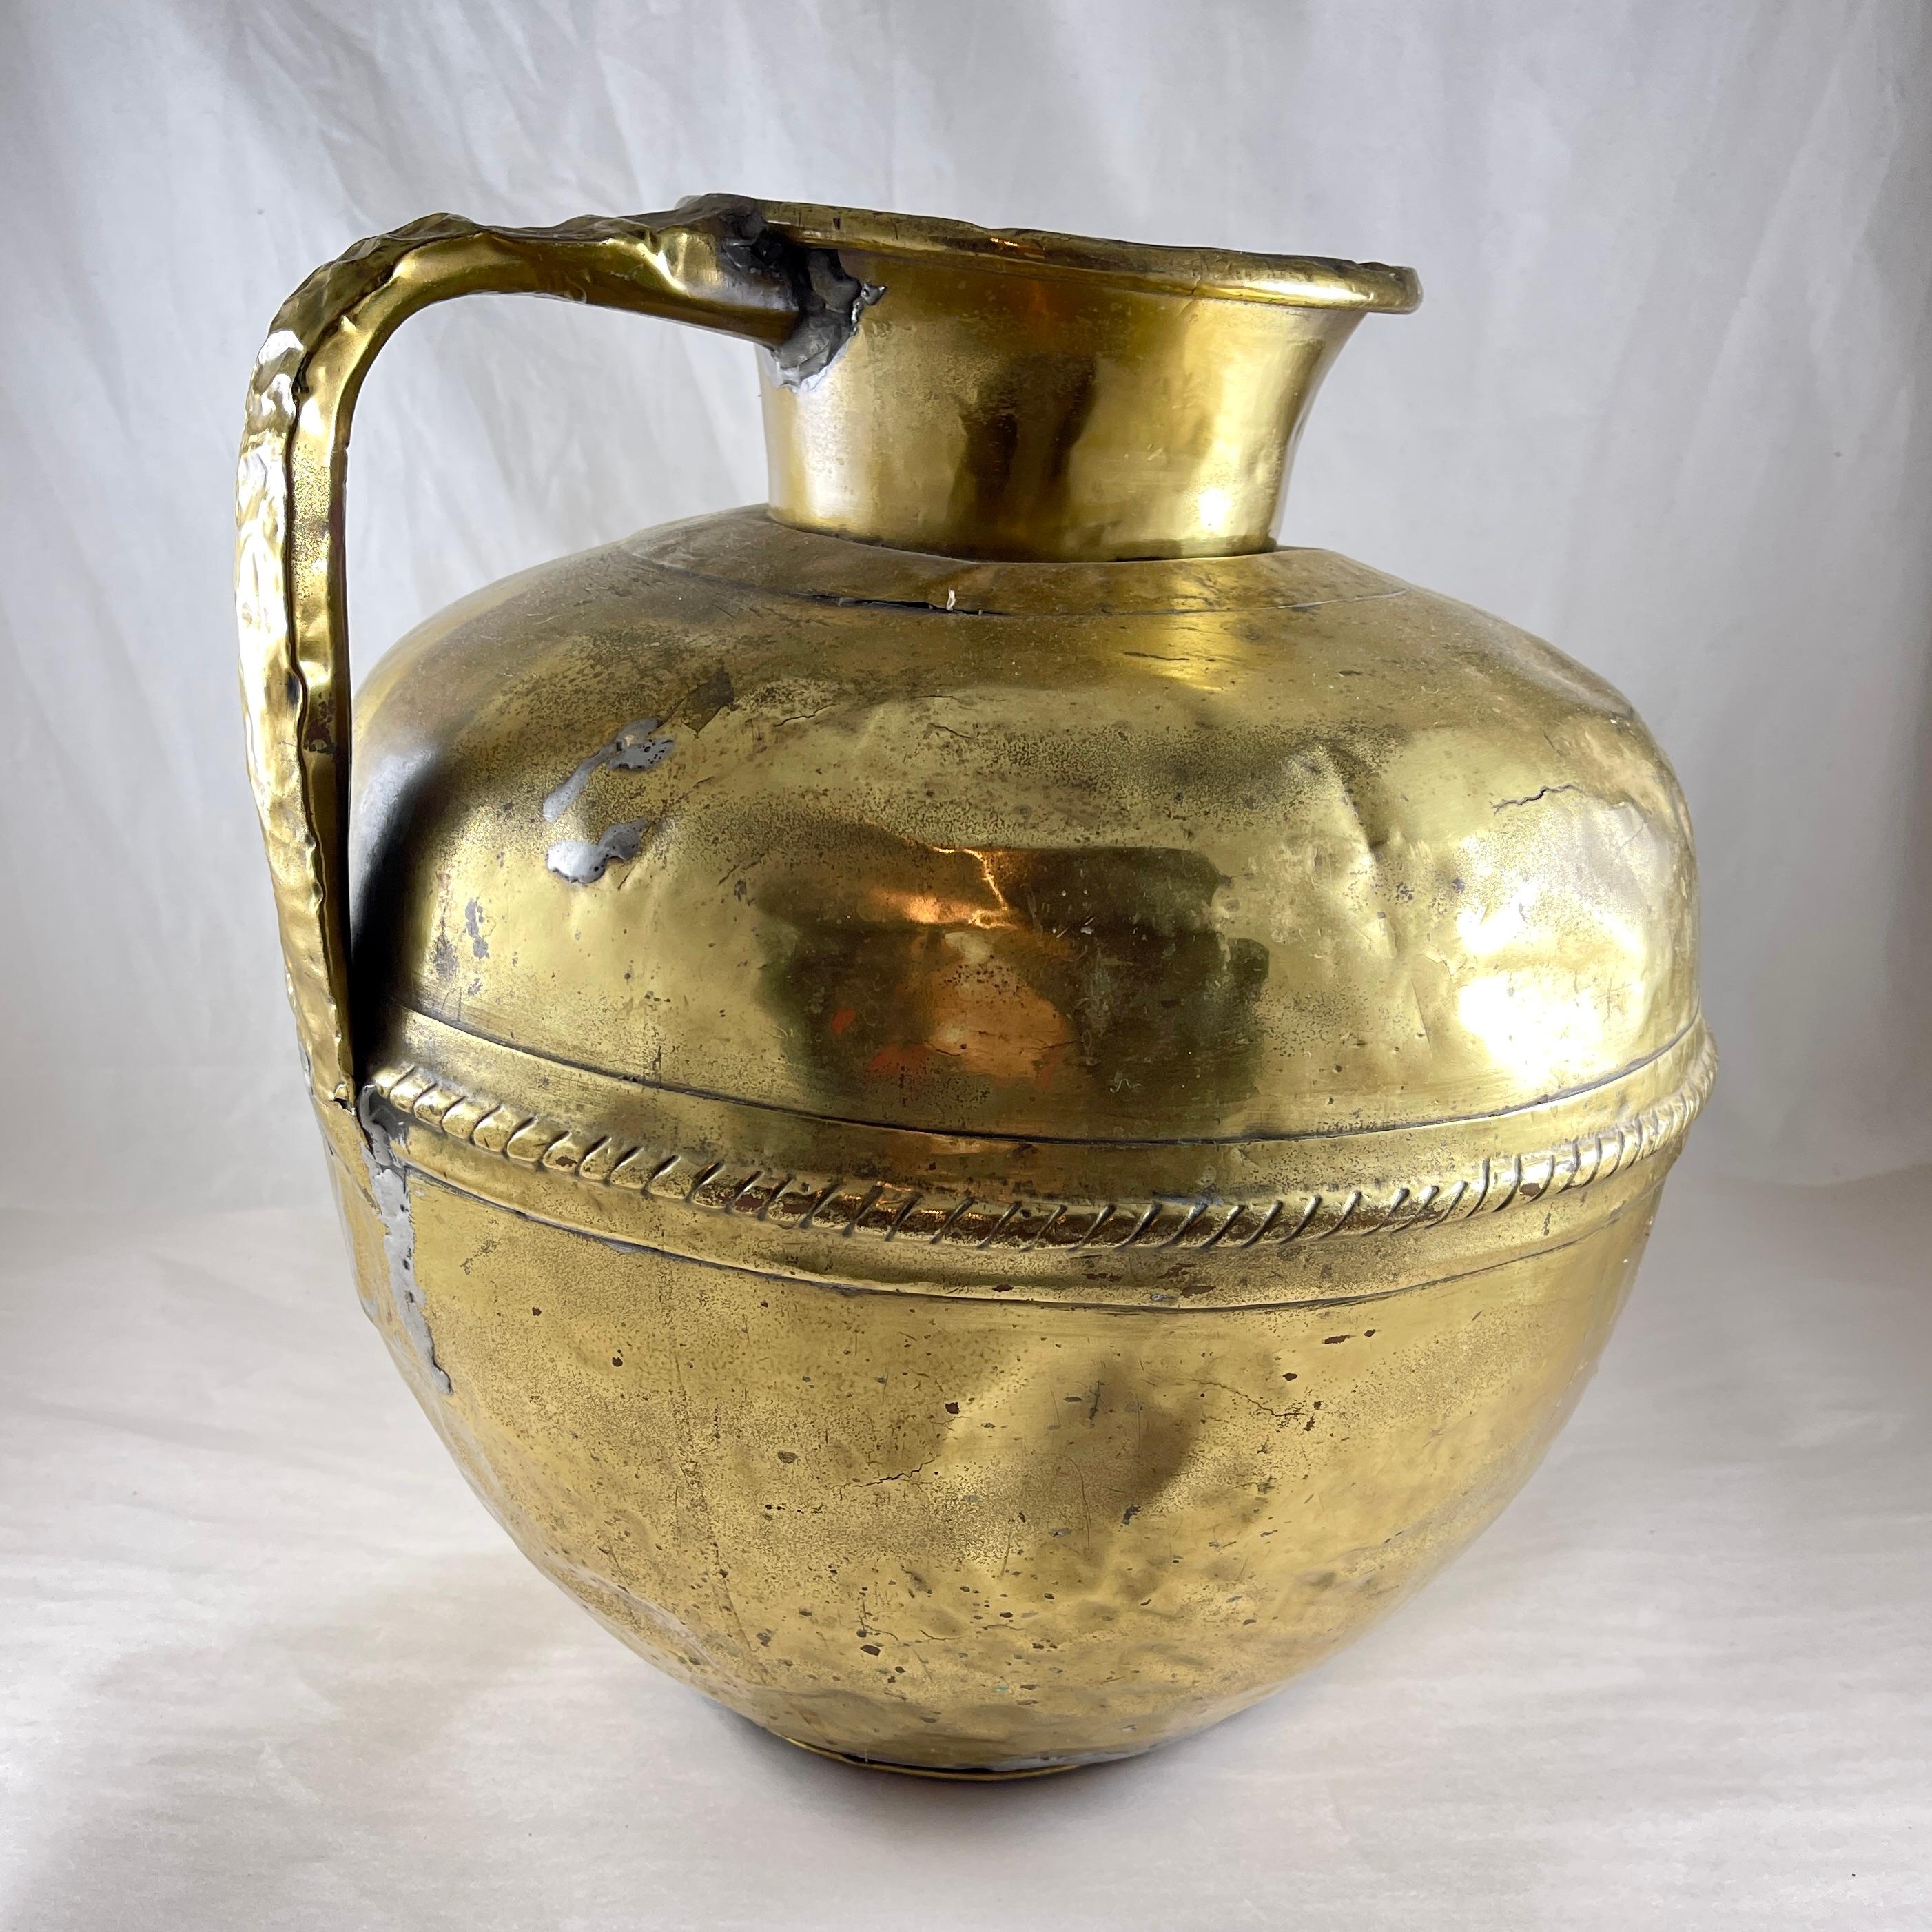 19th Century French Normandy Large Rustic Brass Milk Jug with Lid – circa 1850 For Sale